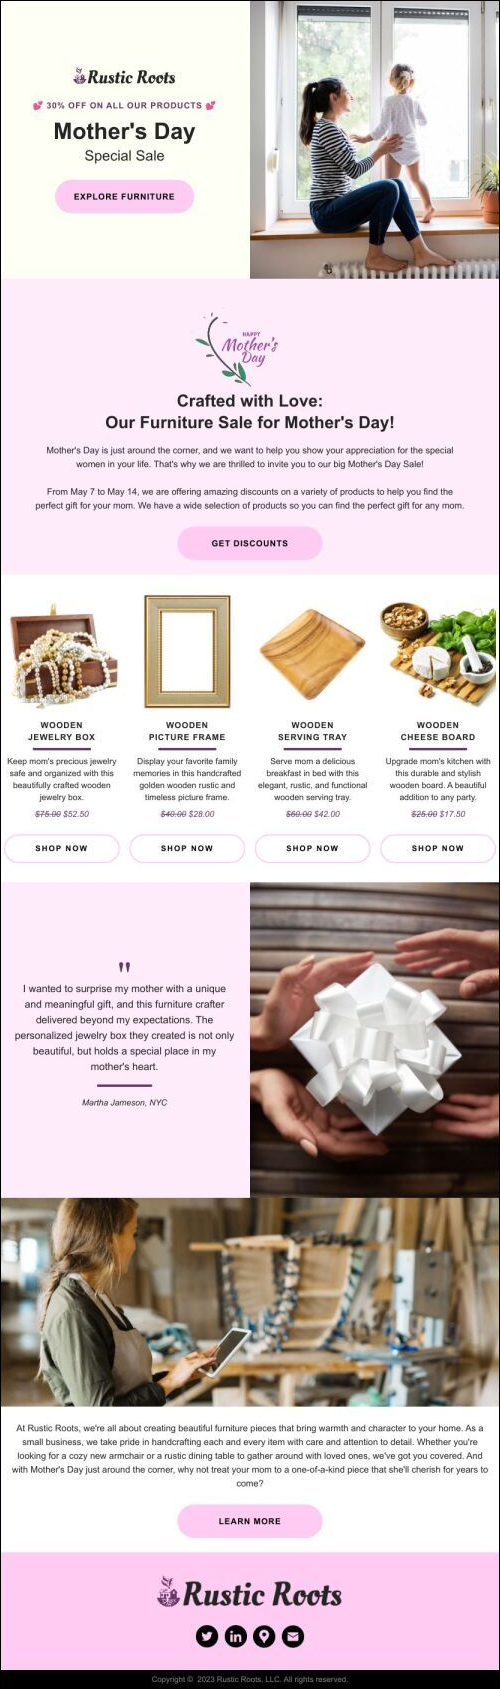 Rustic Roots' attractive dreamy pink Mother's Day Sale campaign